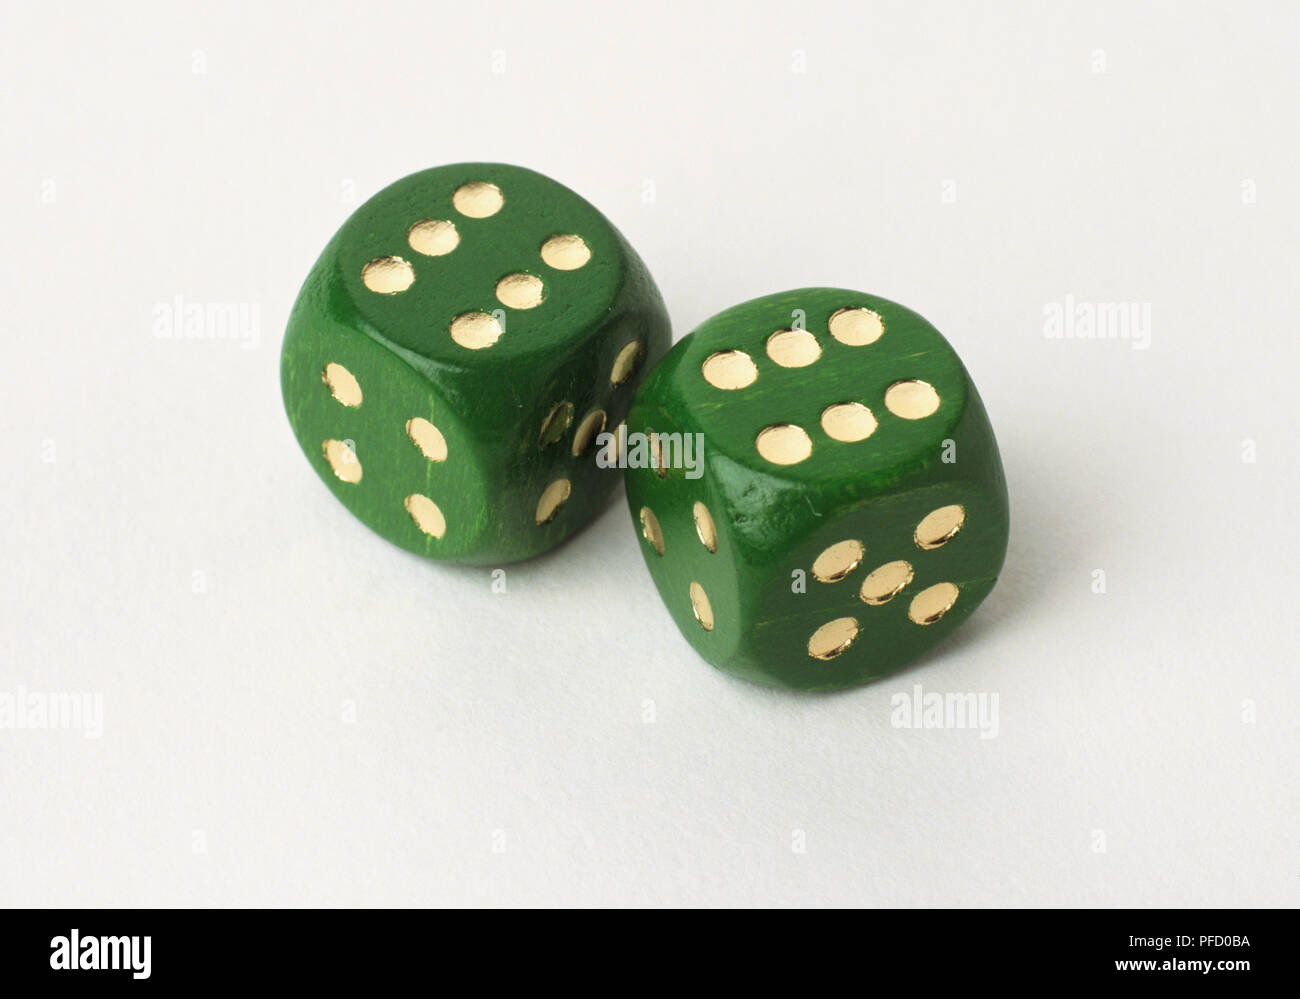 Two green dice with gold dots, close up. Stock Photo